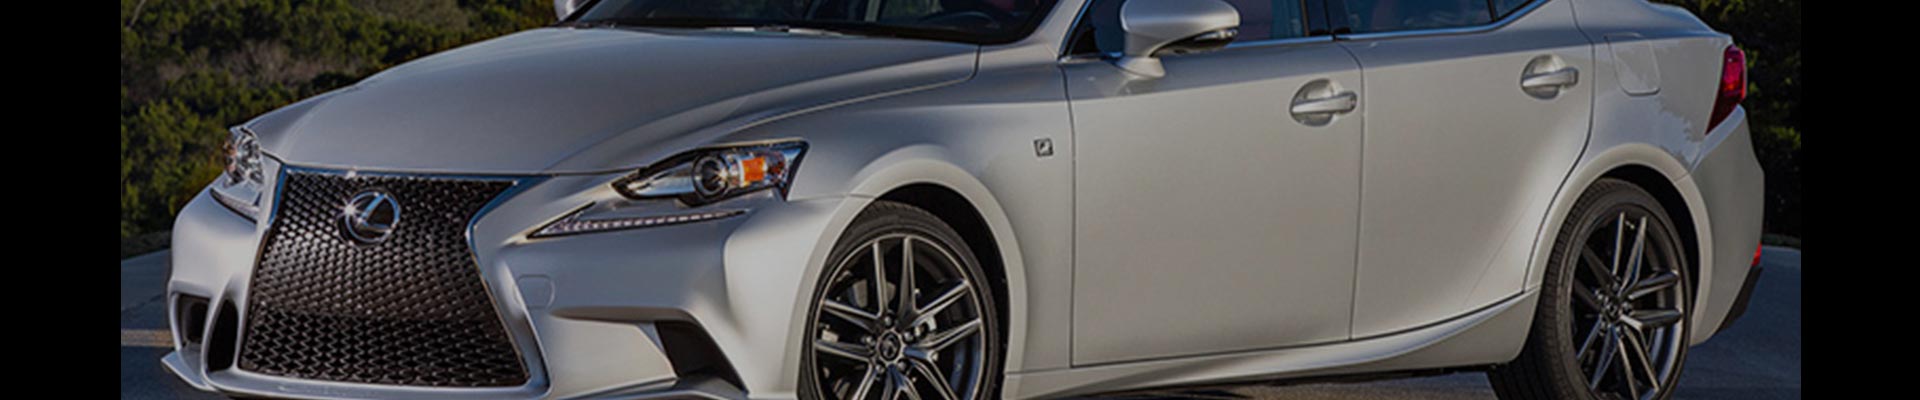 Shop Replacement and OEM 2016 Lexus IS350 Parts with Discounted Price on the Net